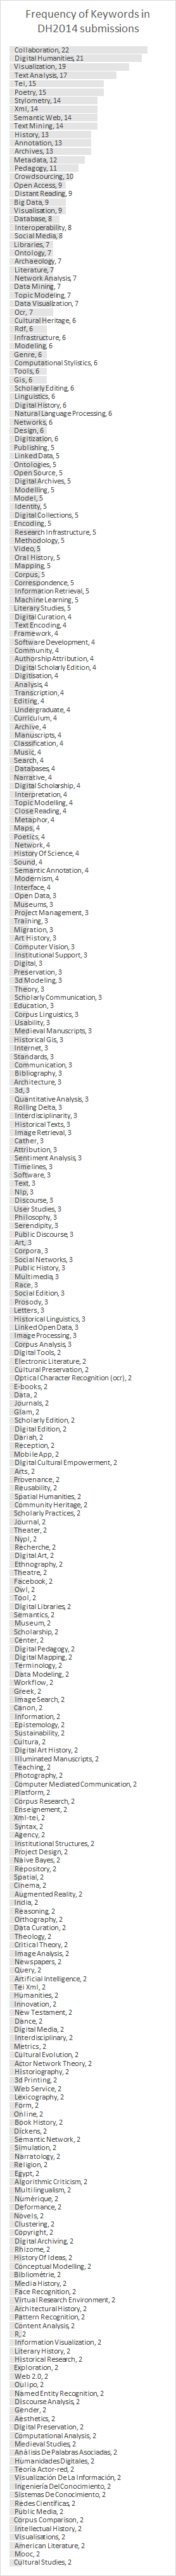 Figure 4. Keywords used in DH2014 submissions ordered by frequency.